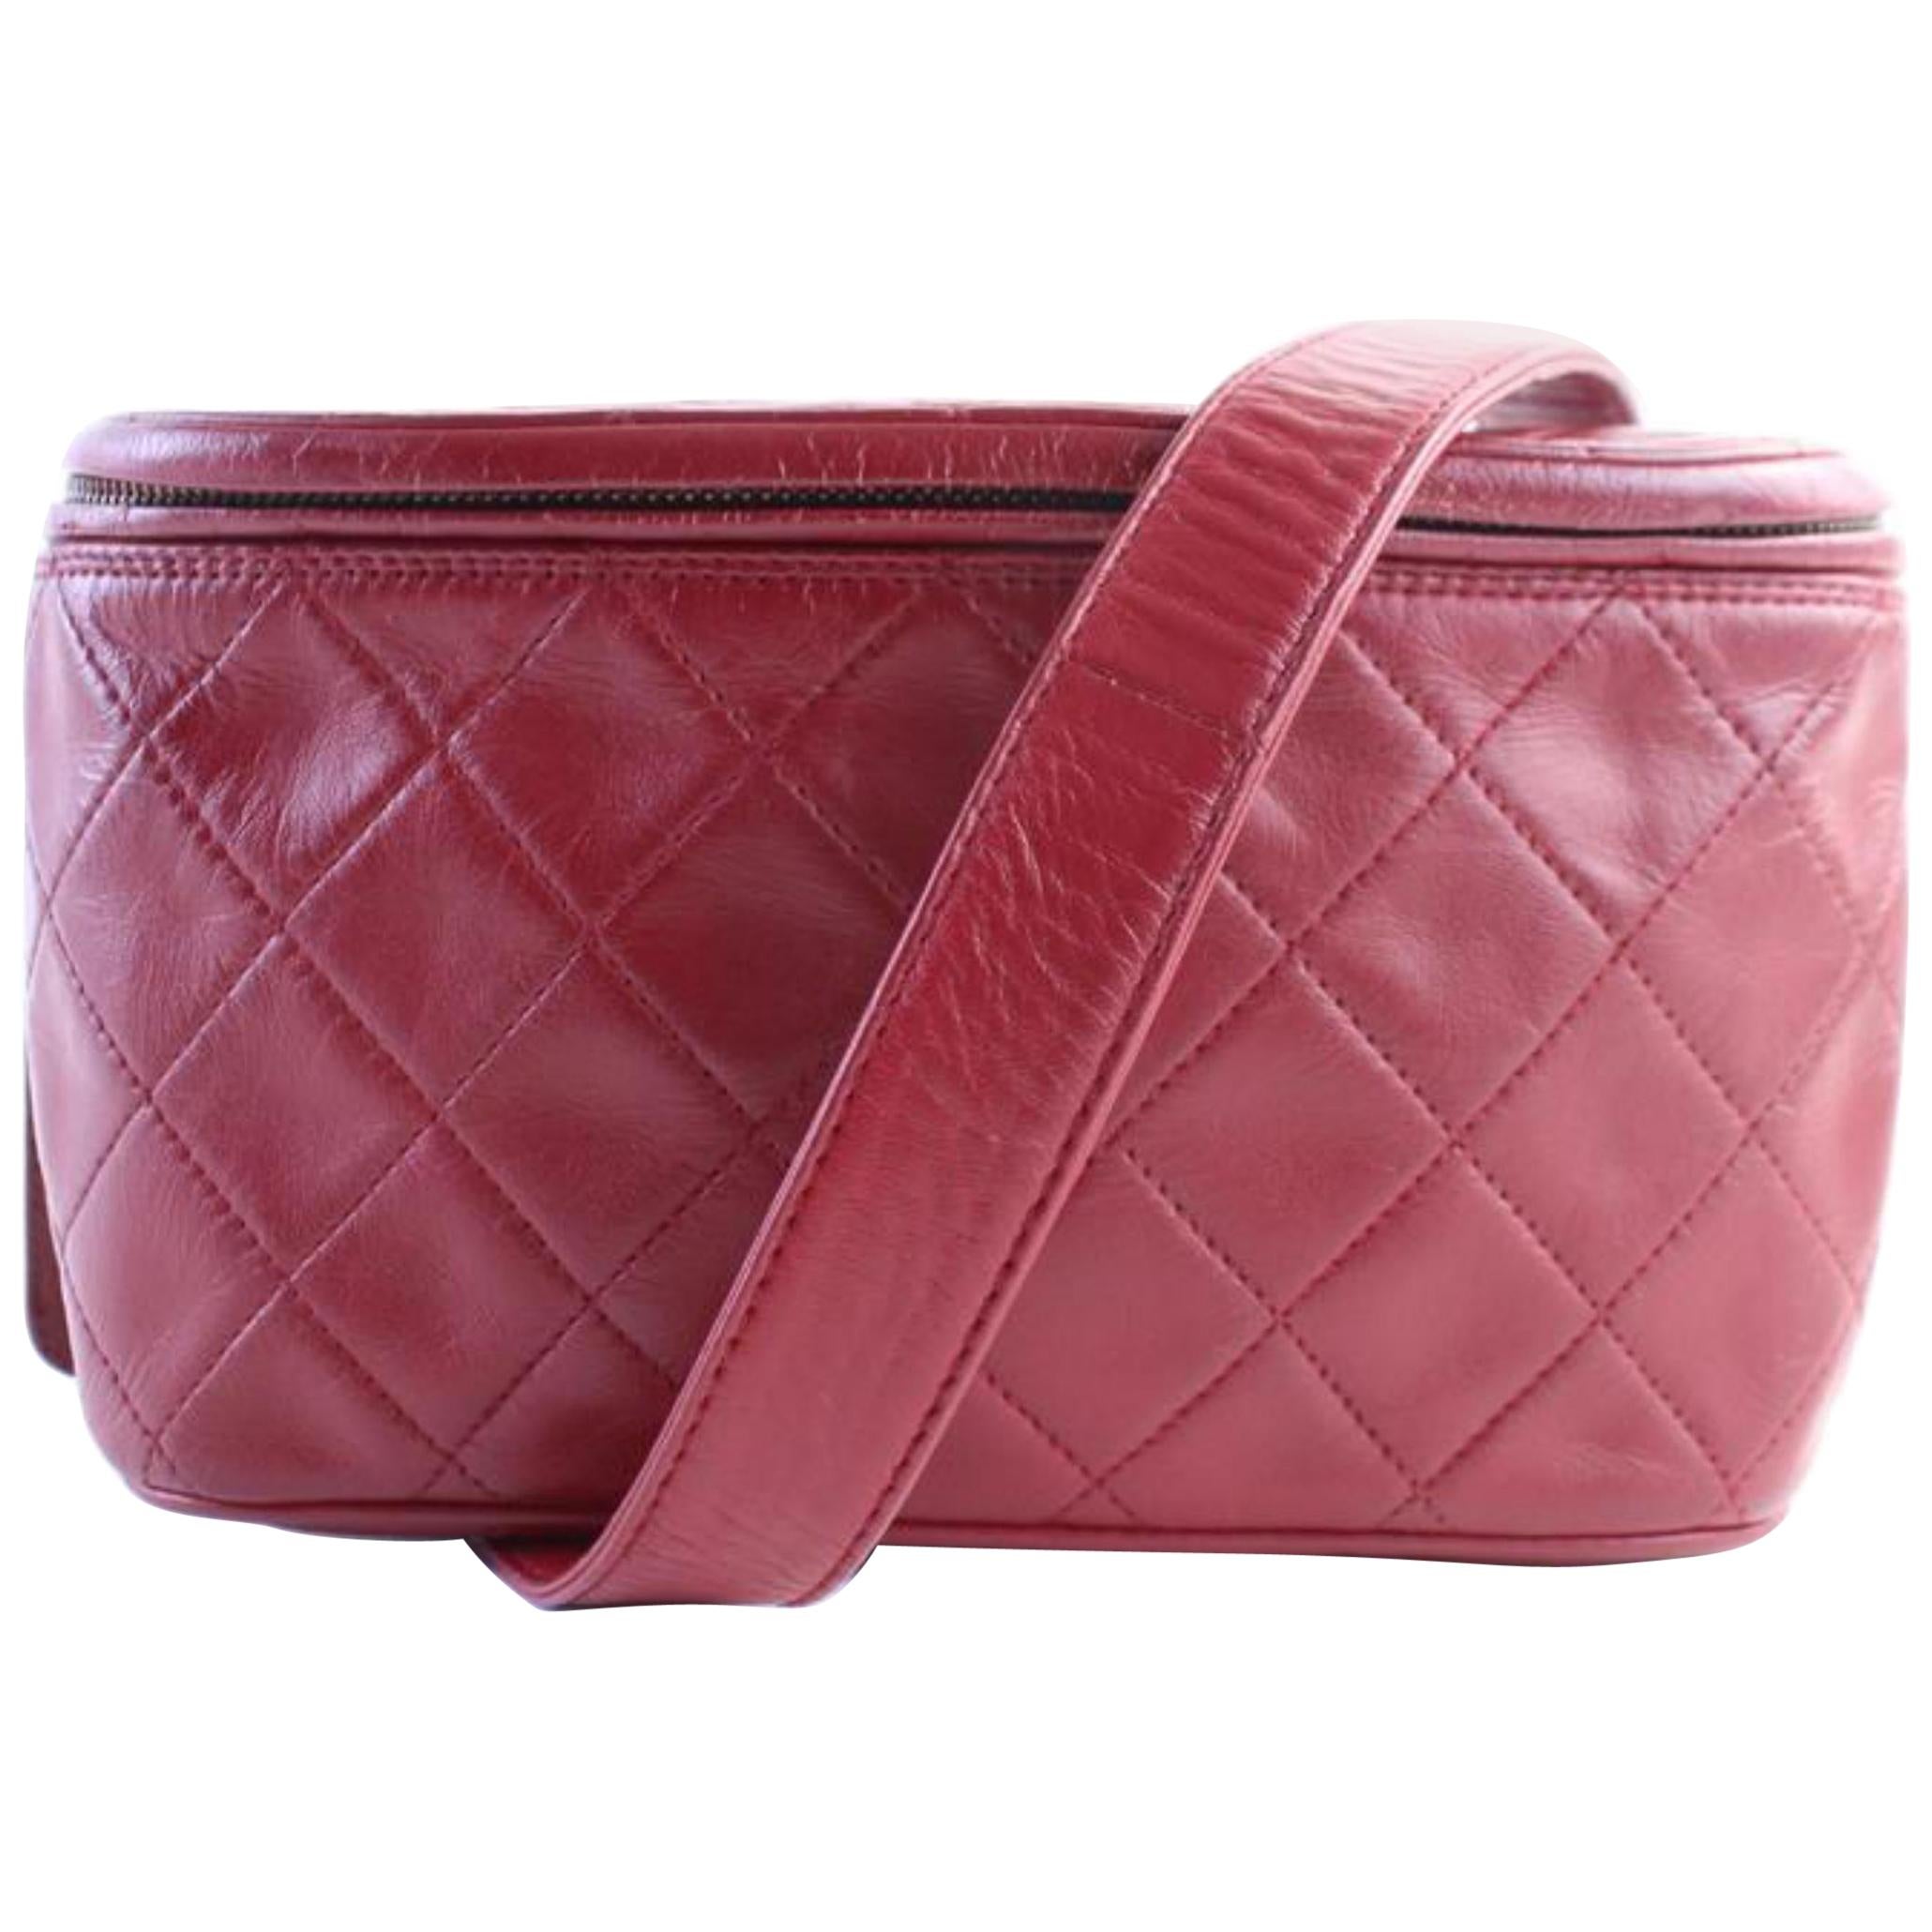 Chanel Fanny Pack Waist Pouch 1cr0703 Red Quilted Leather Cross Body Bag For Sale